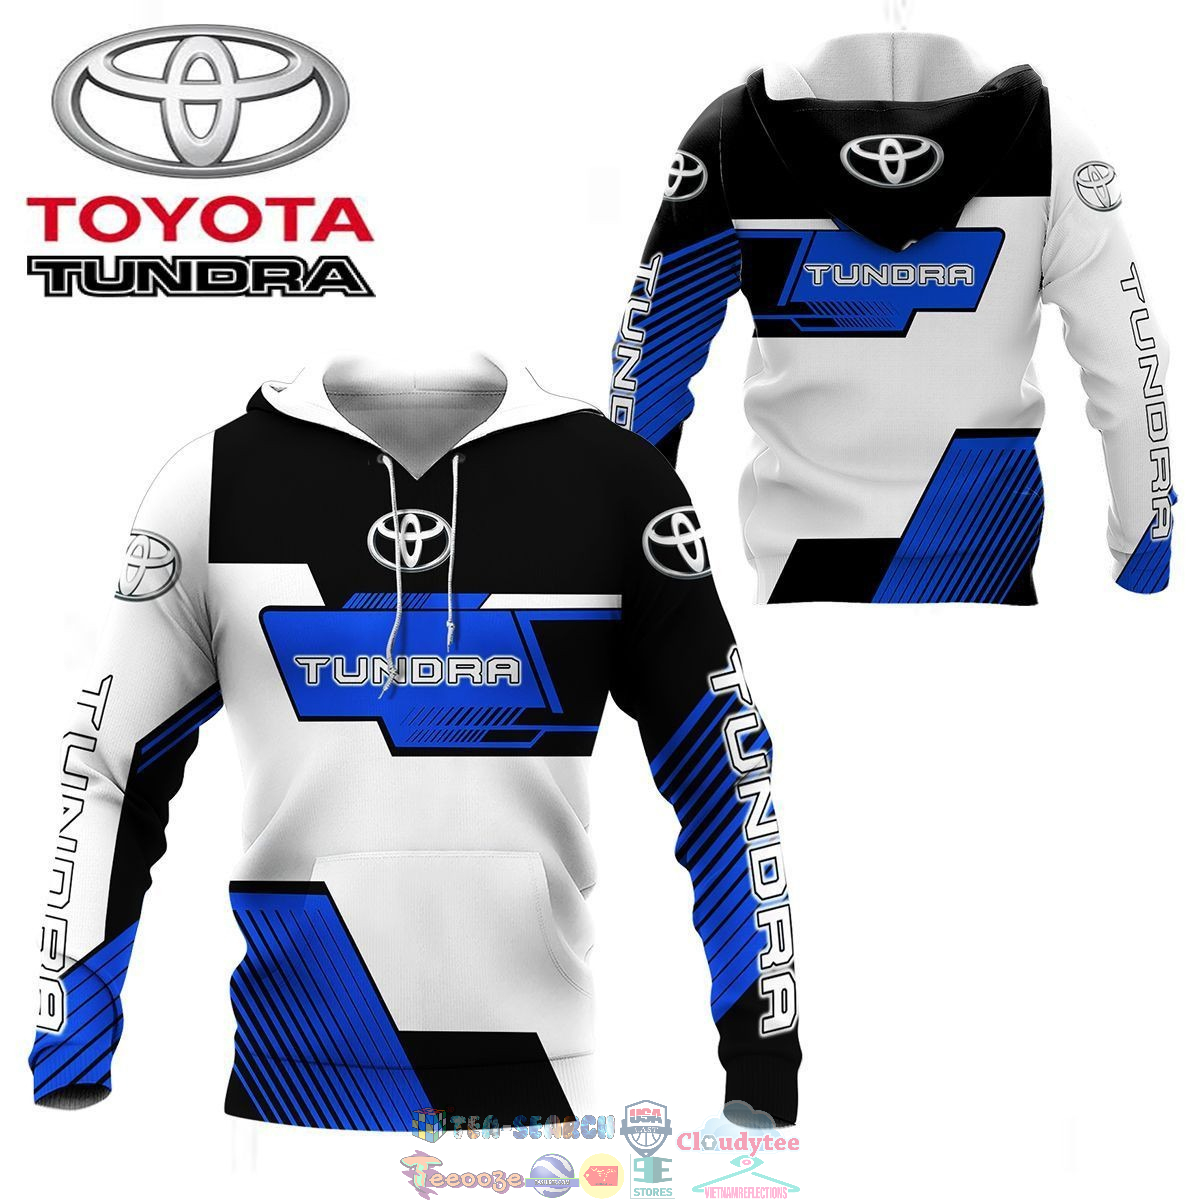 Toyota Tundra ver 17 3D hoodie and t-shirt